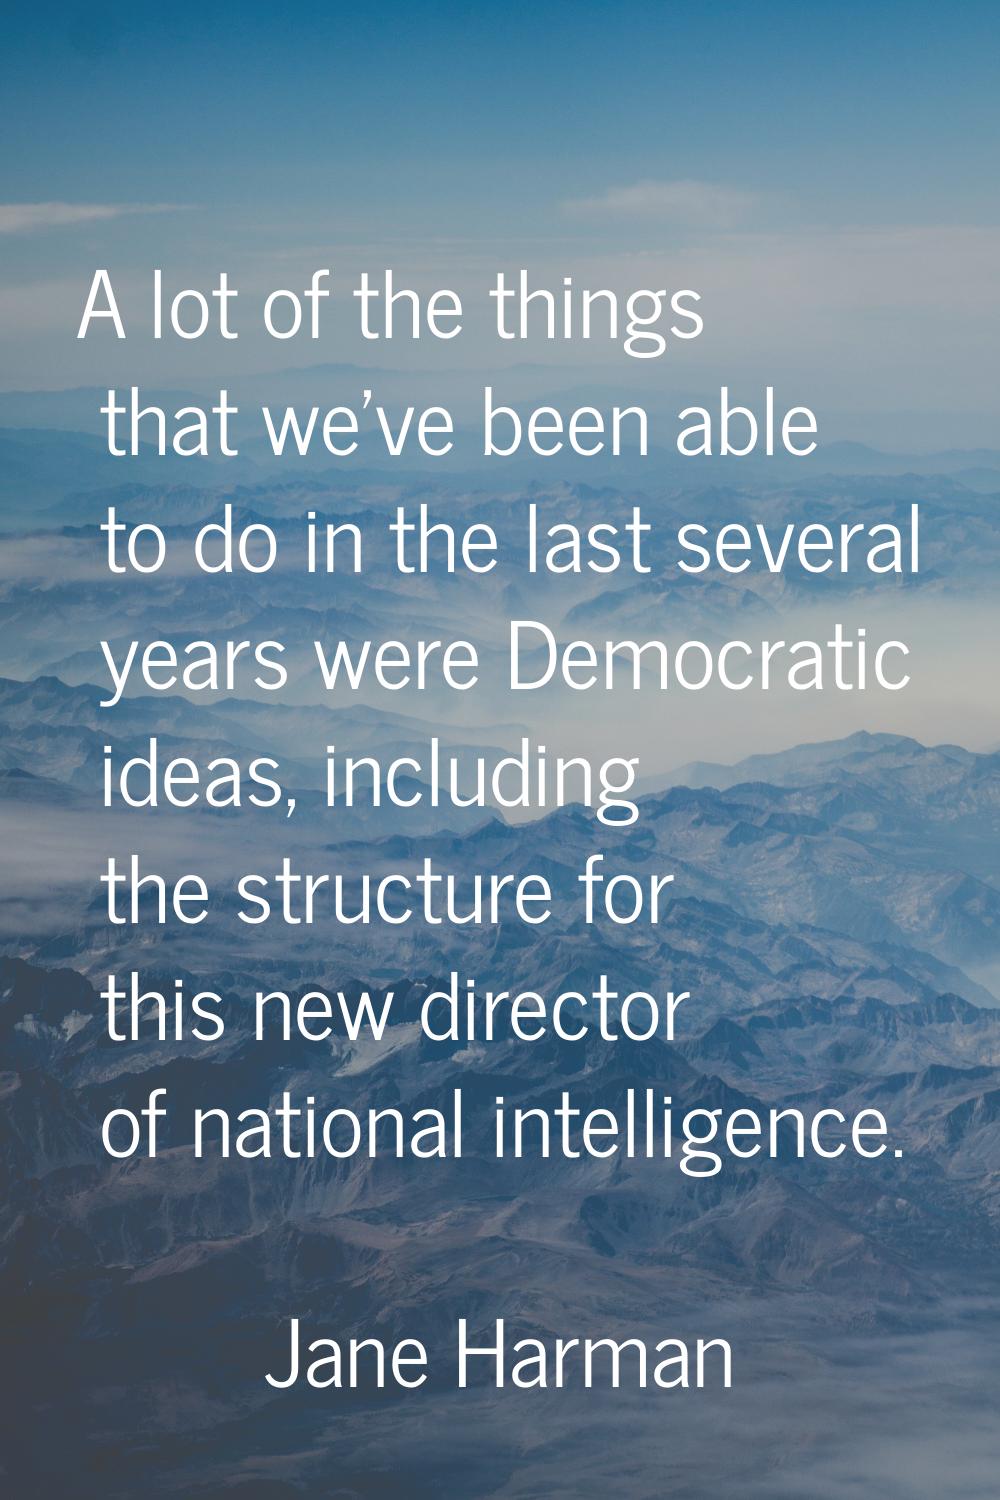 A lot of the things that we've been able to do in the last several years were Democratic ideas, inc